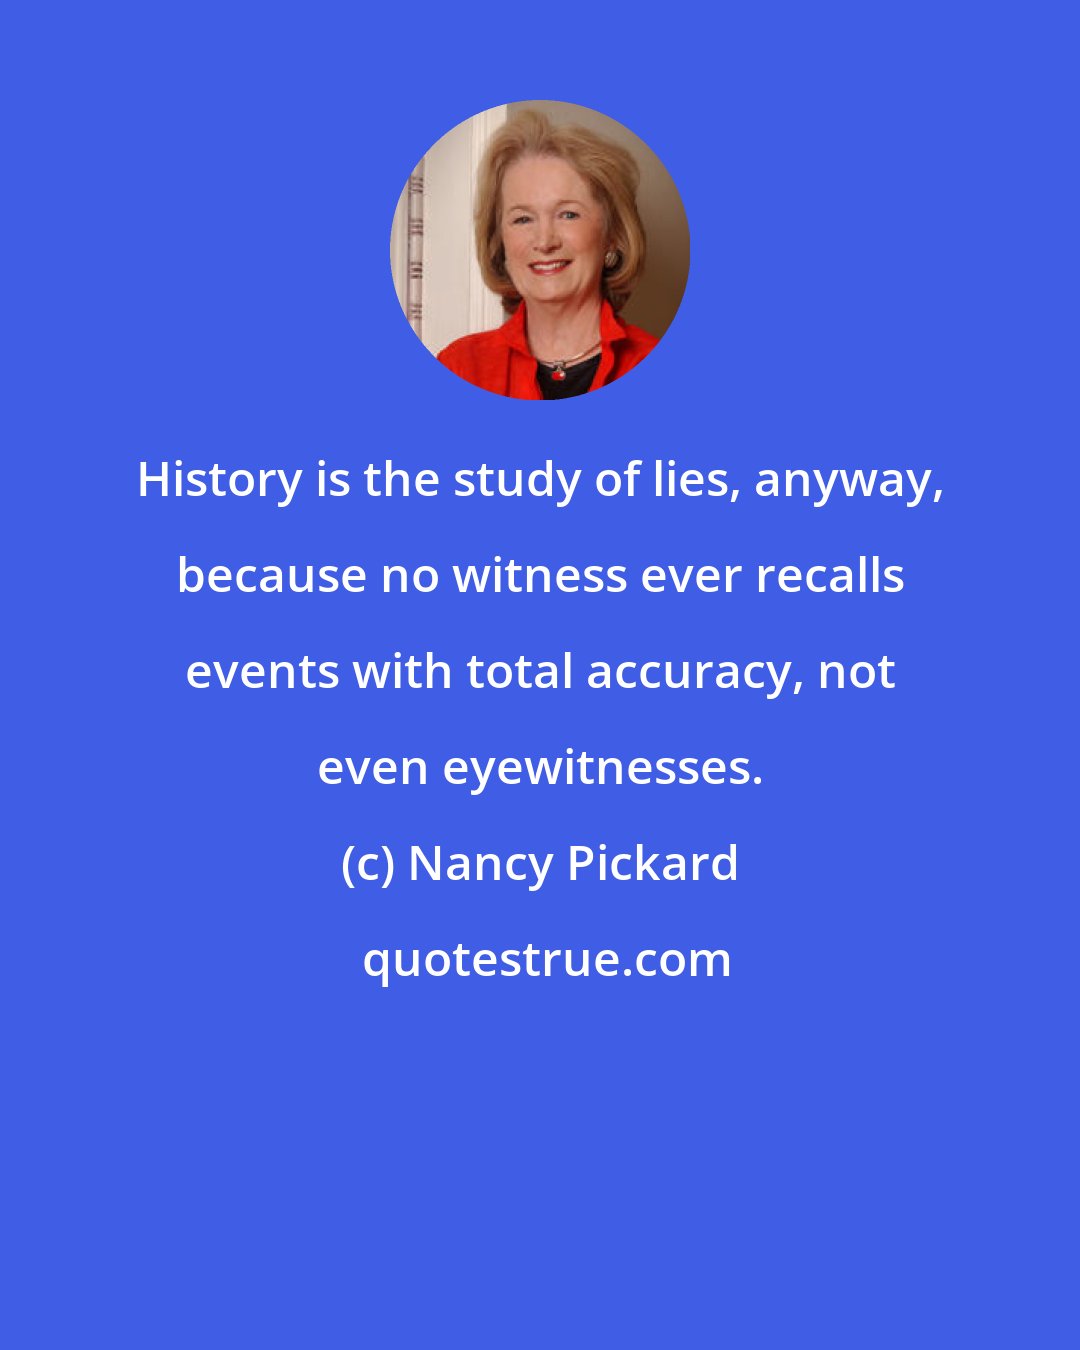 Nancy Pickard: History is the study of lies, anyway, because no witness ever recalls events with total accuracy, not even eyewitnesses.